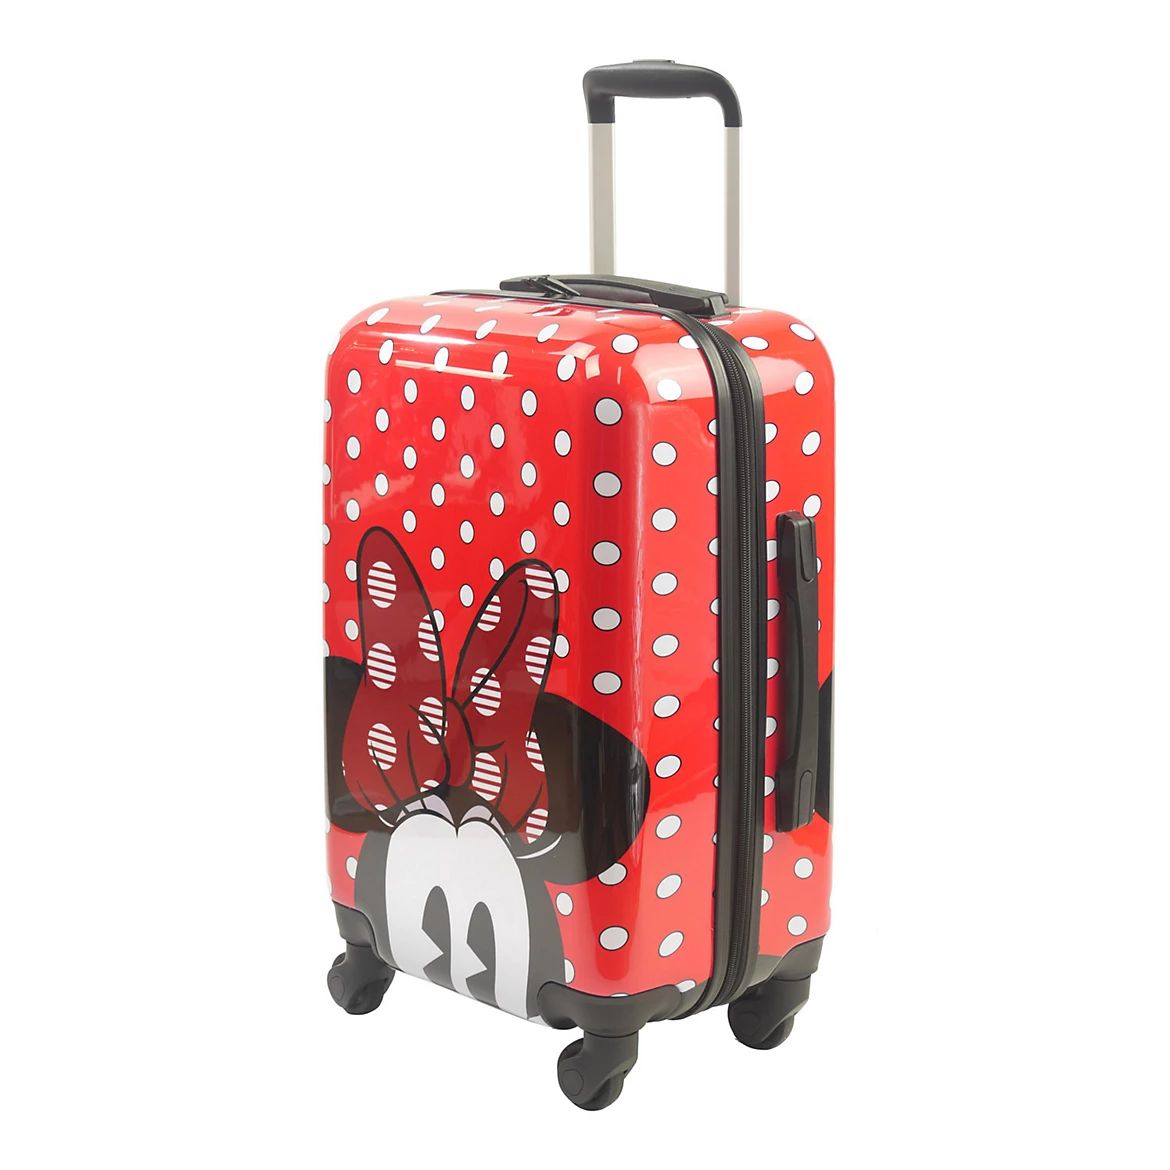 ful Disney's Minnie Mouse 21-Inch Carry-On Hardside Spinner Luggage | Kohl's